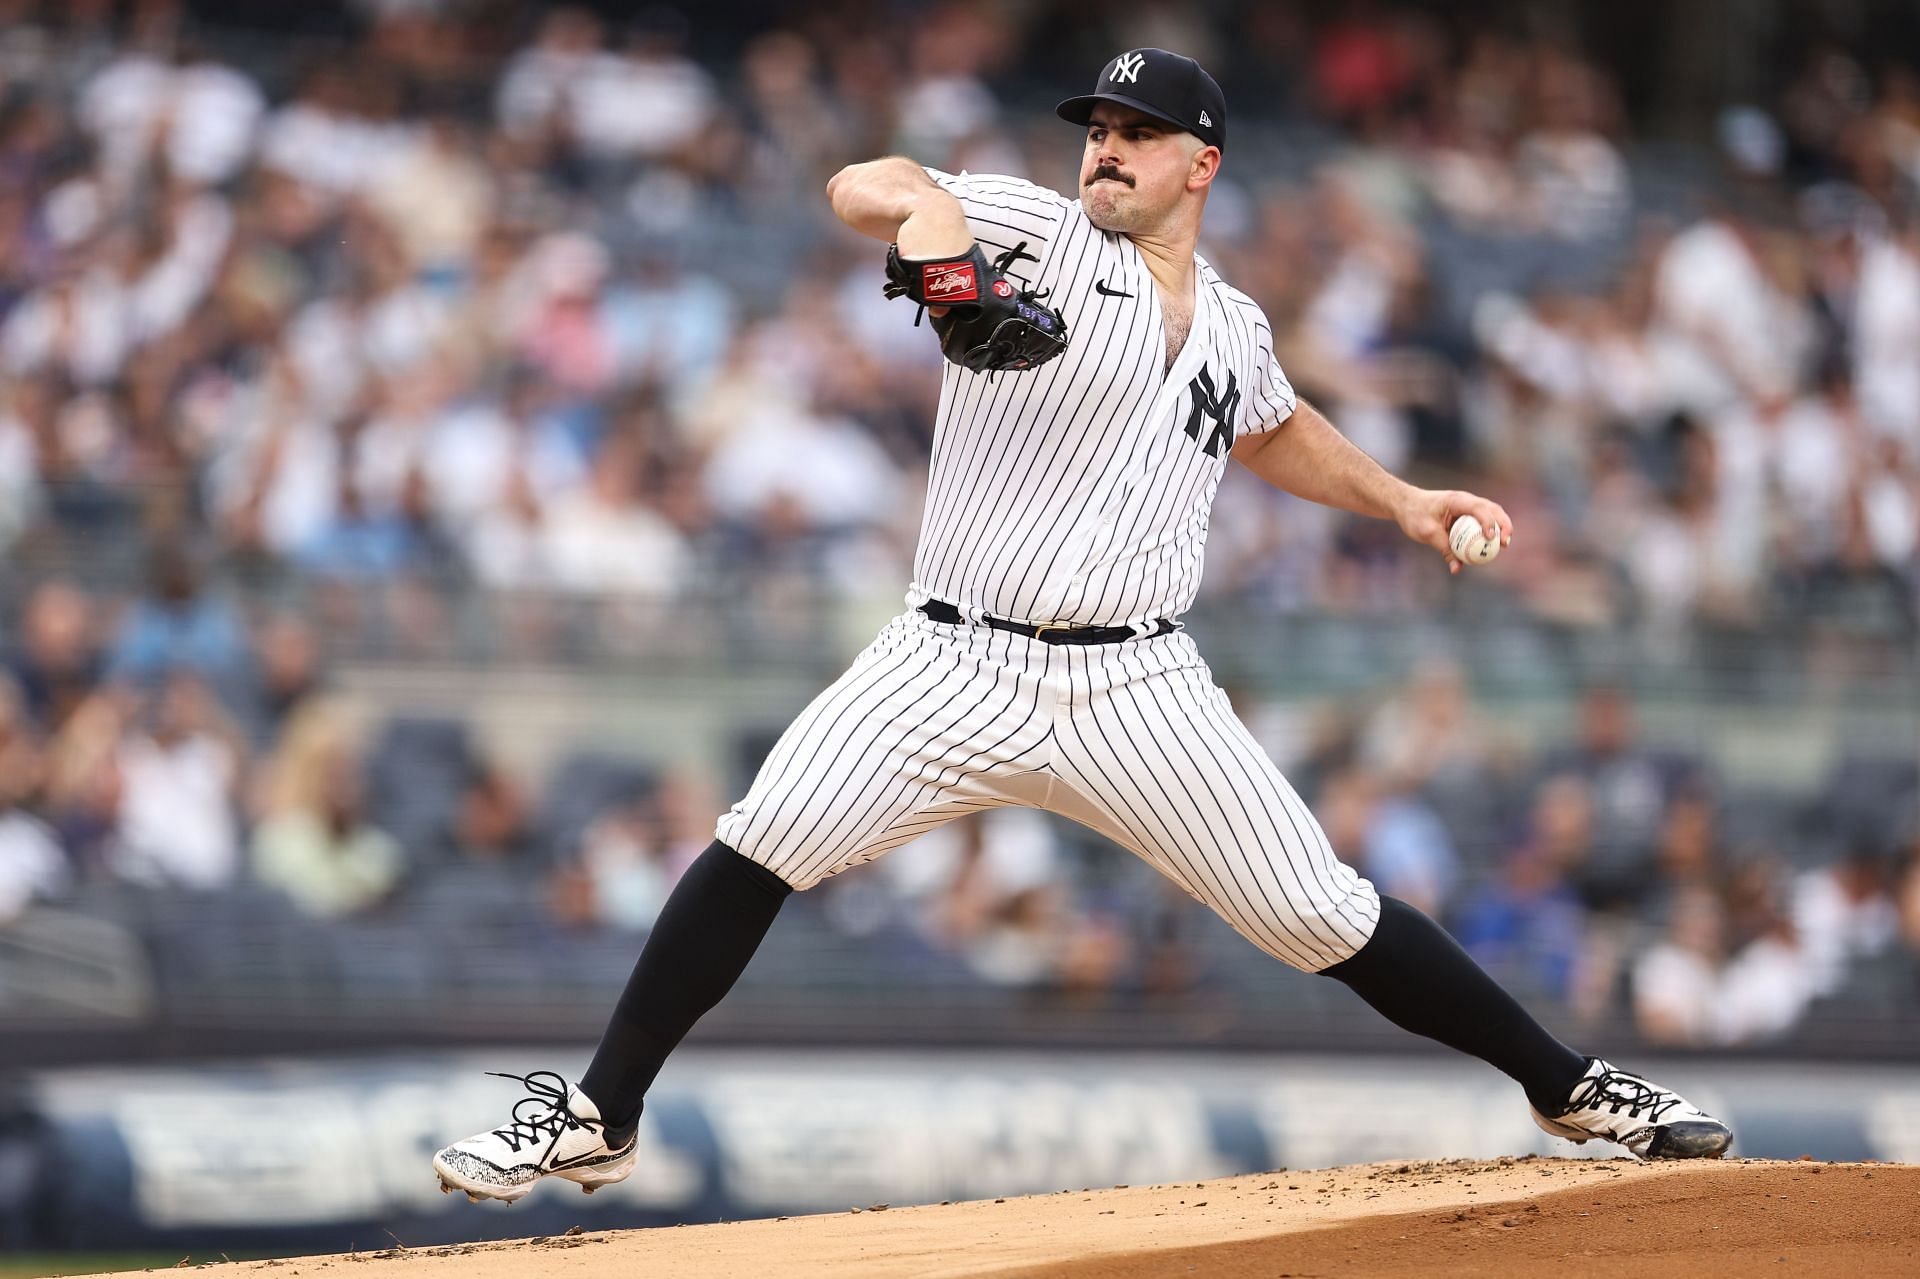 Carlos Rodon of the New York Yankees throws a pitch against the Chicago Cubs at Yankee Stadium